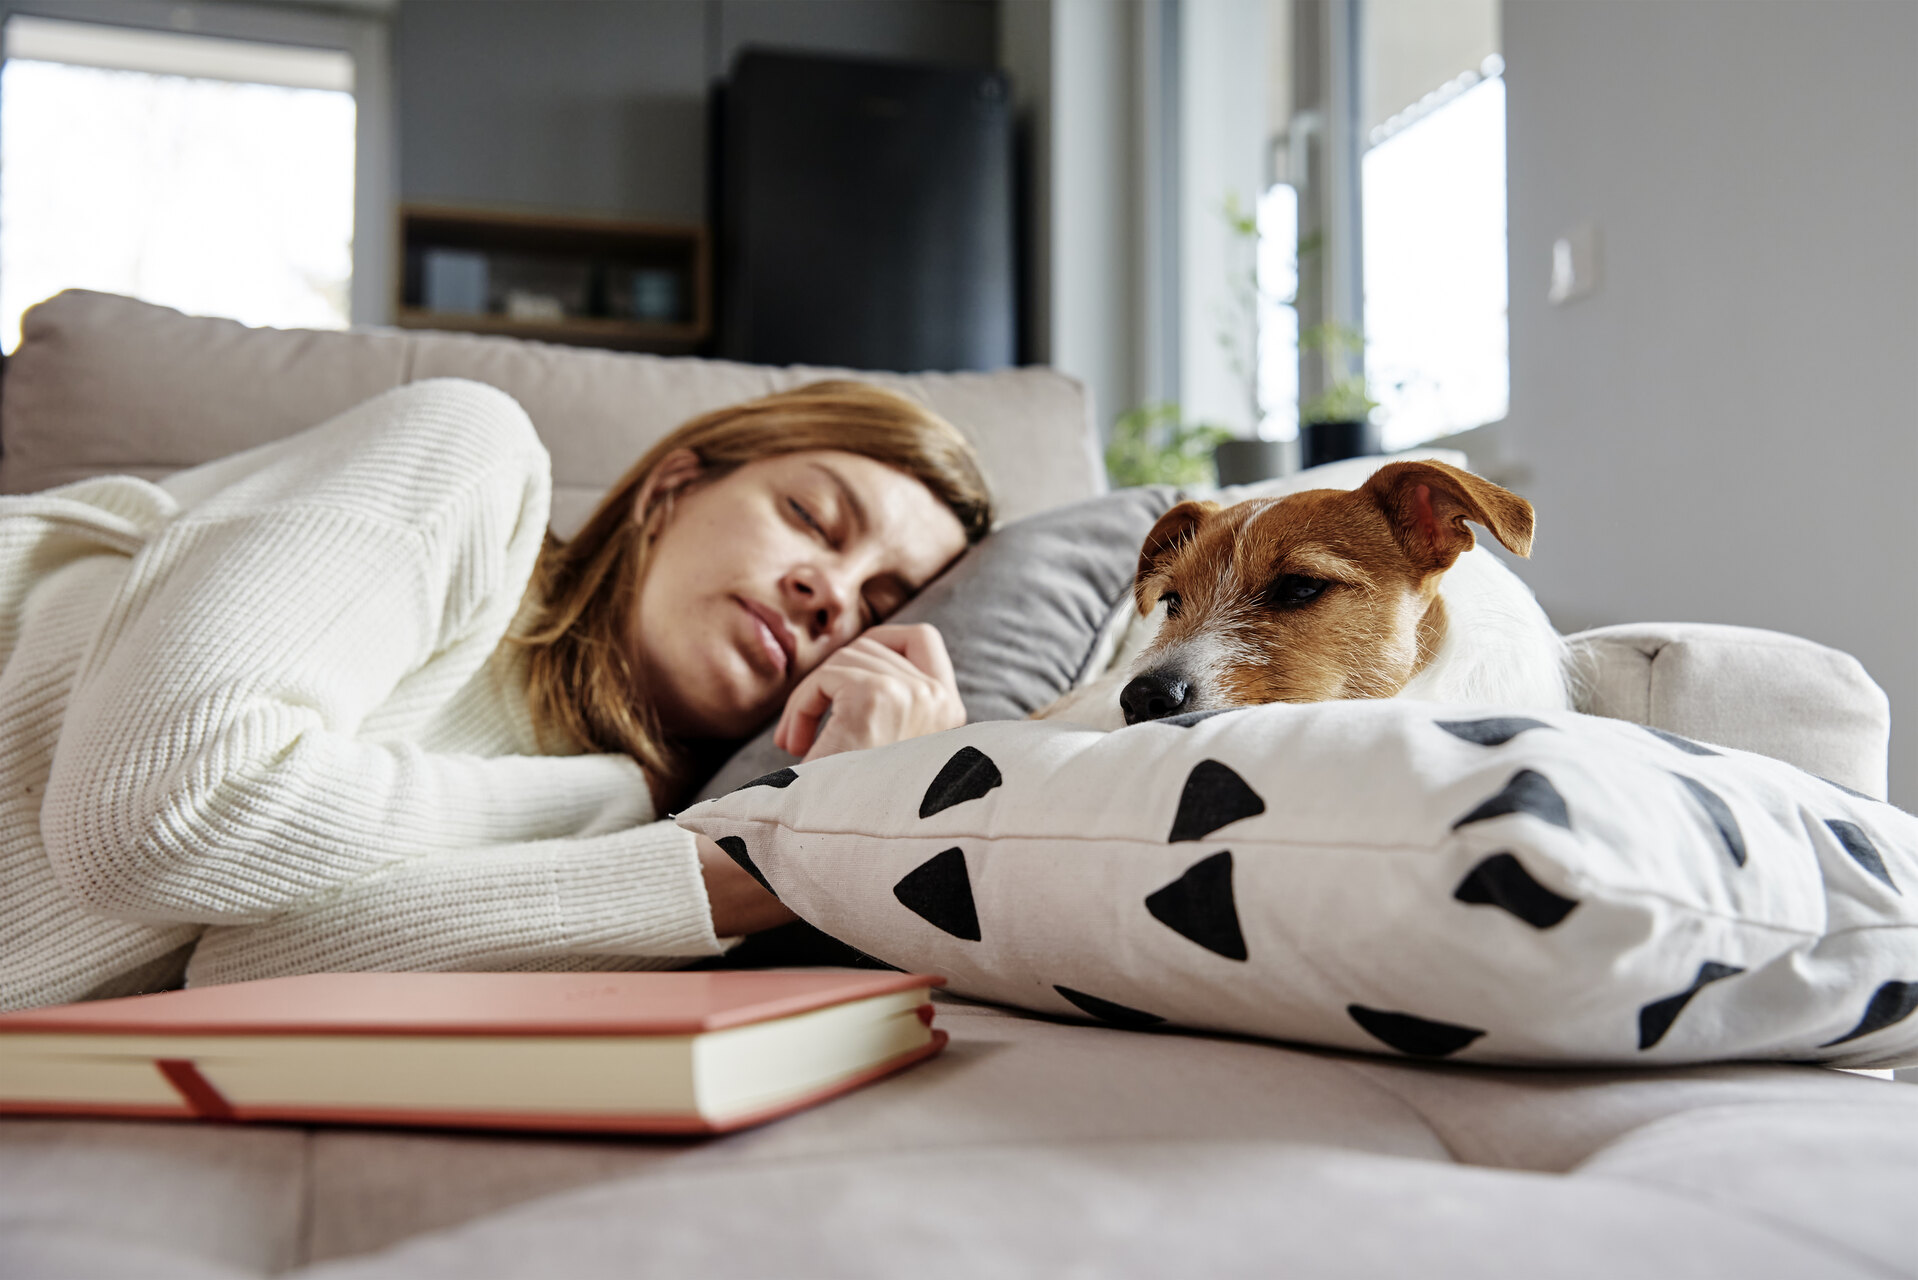 A woman sleeping next to a dog at home